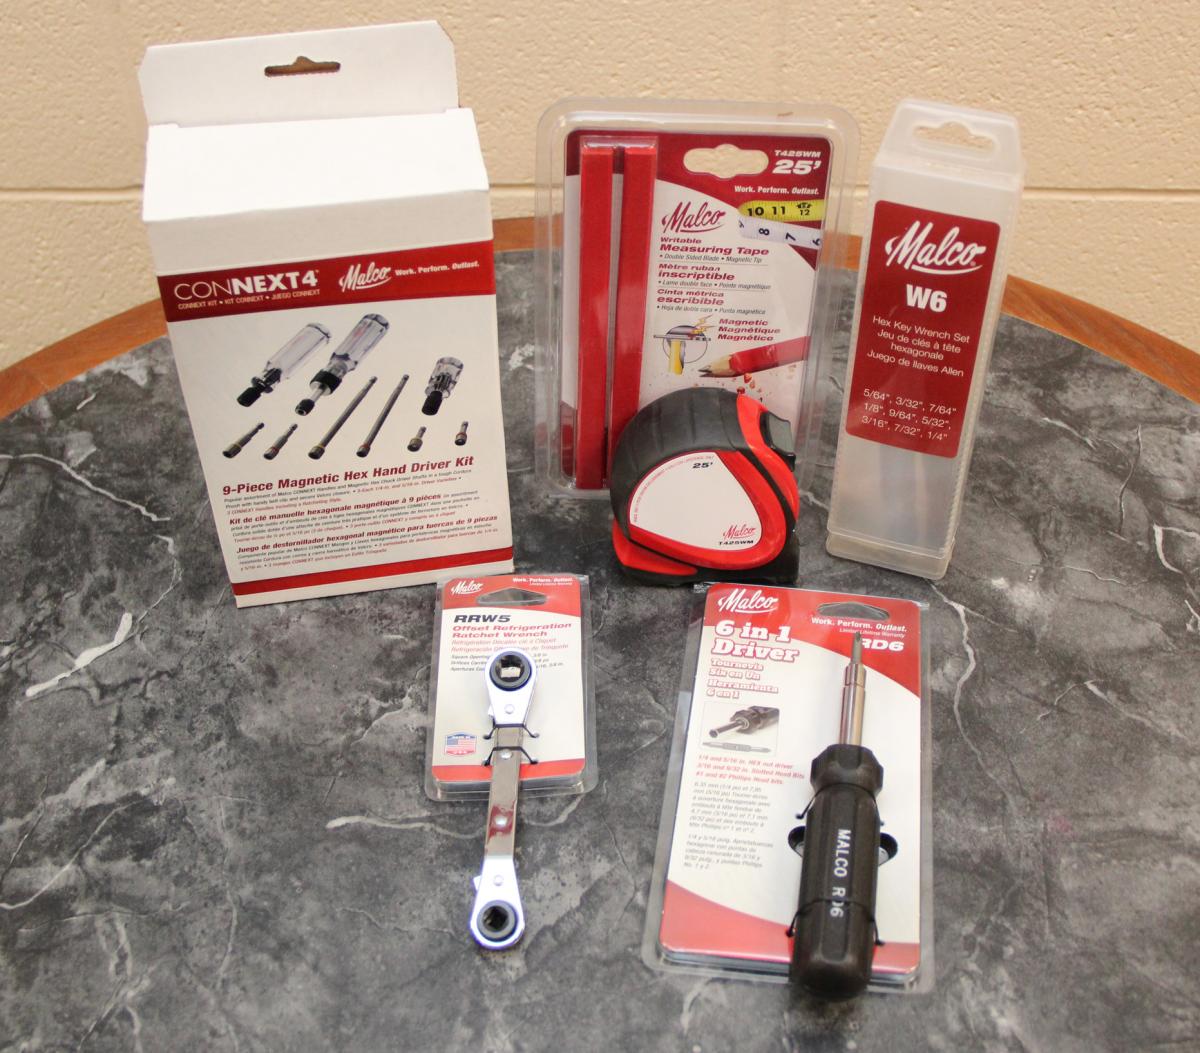 Tools that Malco Products provided to Jeremy Mullins.